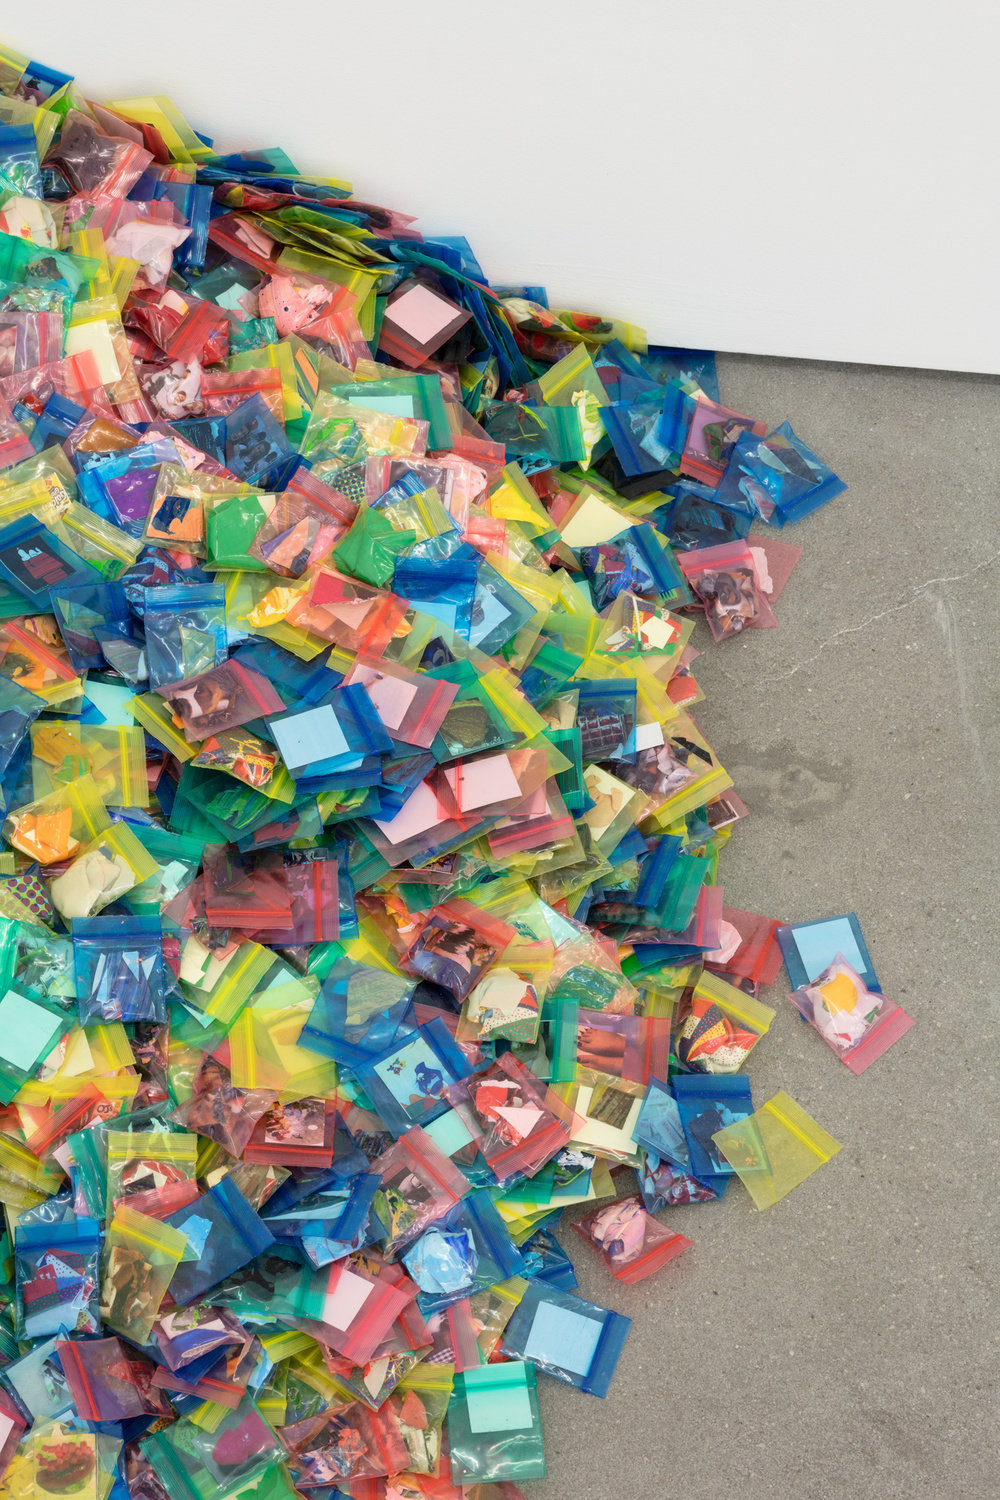 Strother, appropriation part 18 reperations installment 1 (wheres my 40 acres land) (detail 1), 2017, plastic bags, dry paint, inkjet paper, fabric, dimensions variable, cnon 59.445